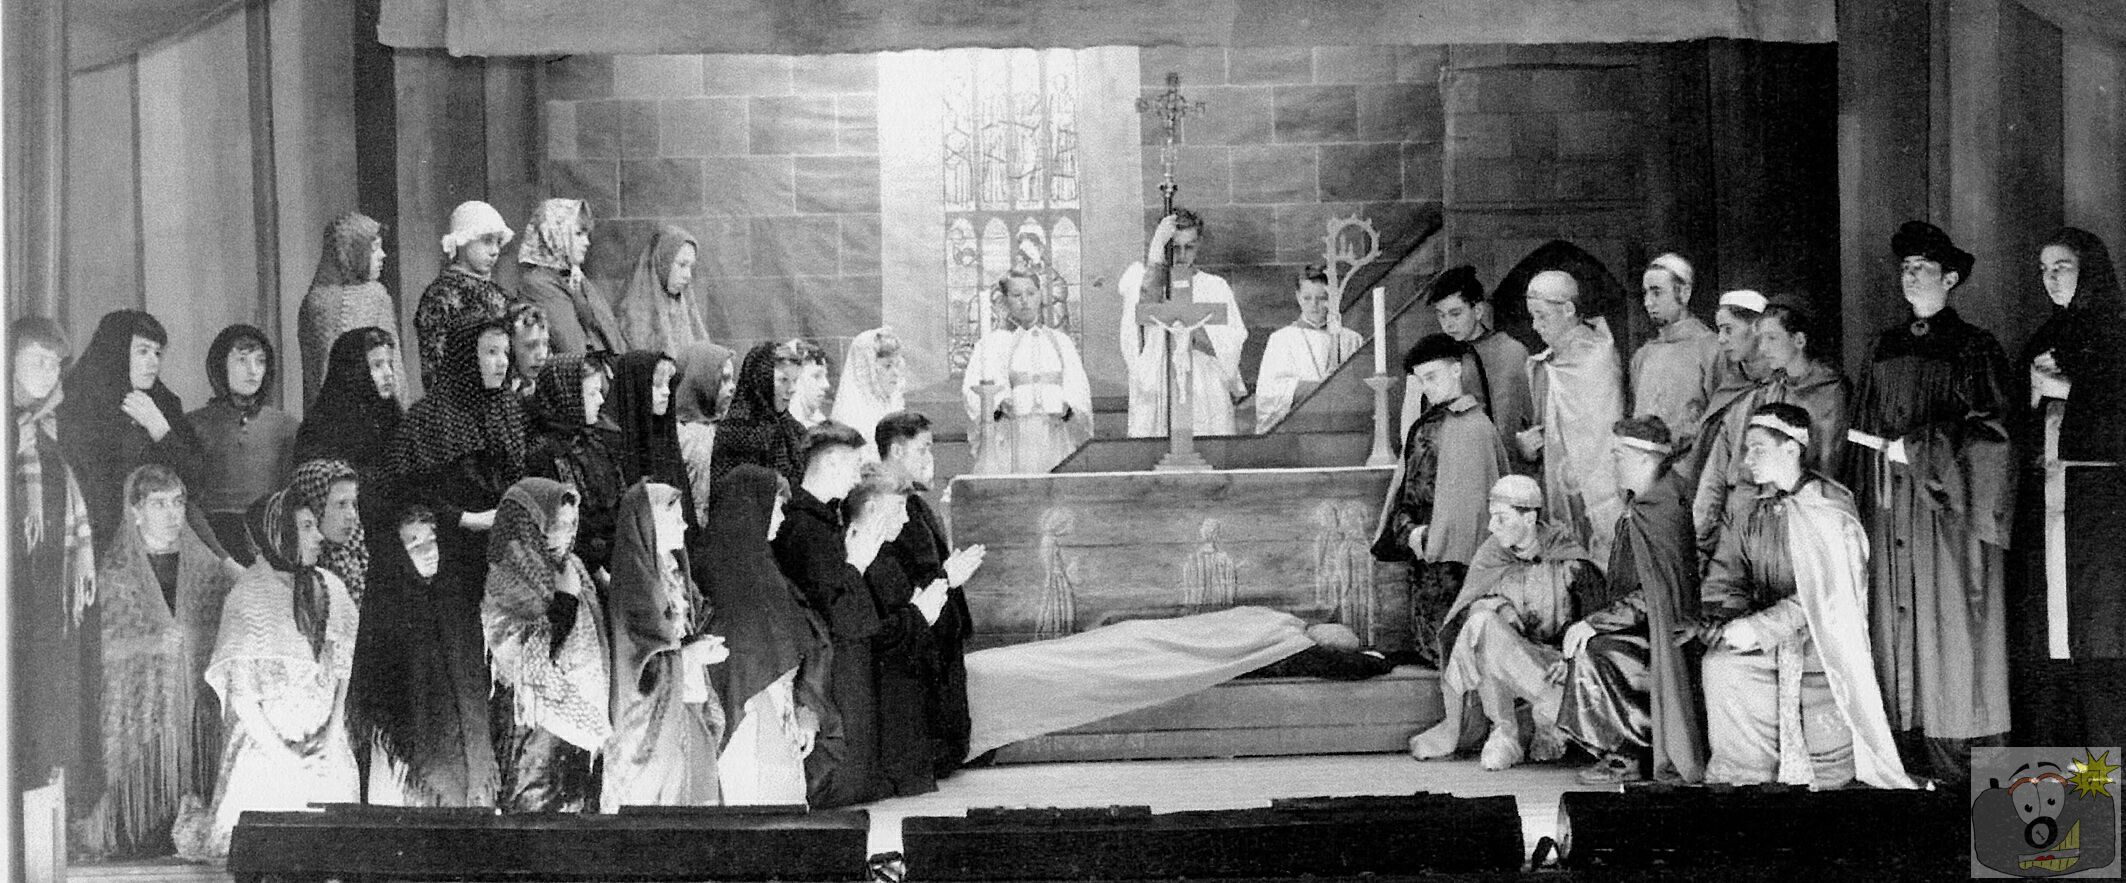 The Cast of Murder in trhe Cathedral 1951